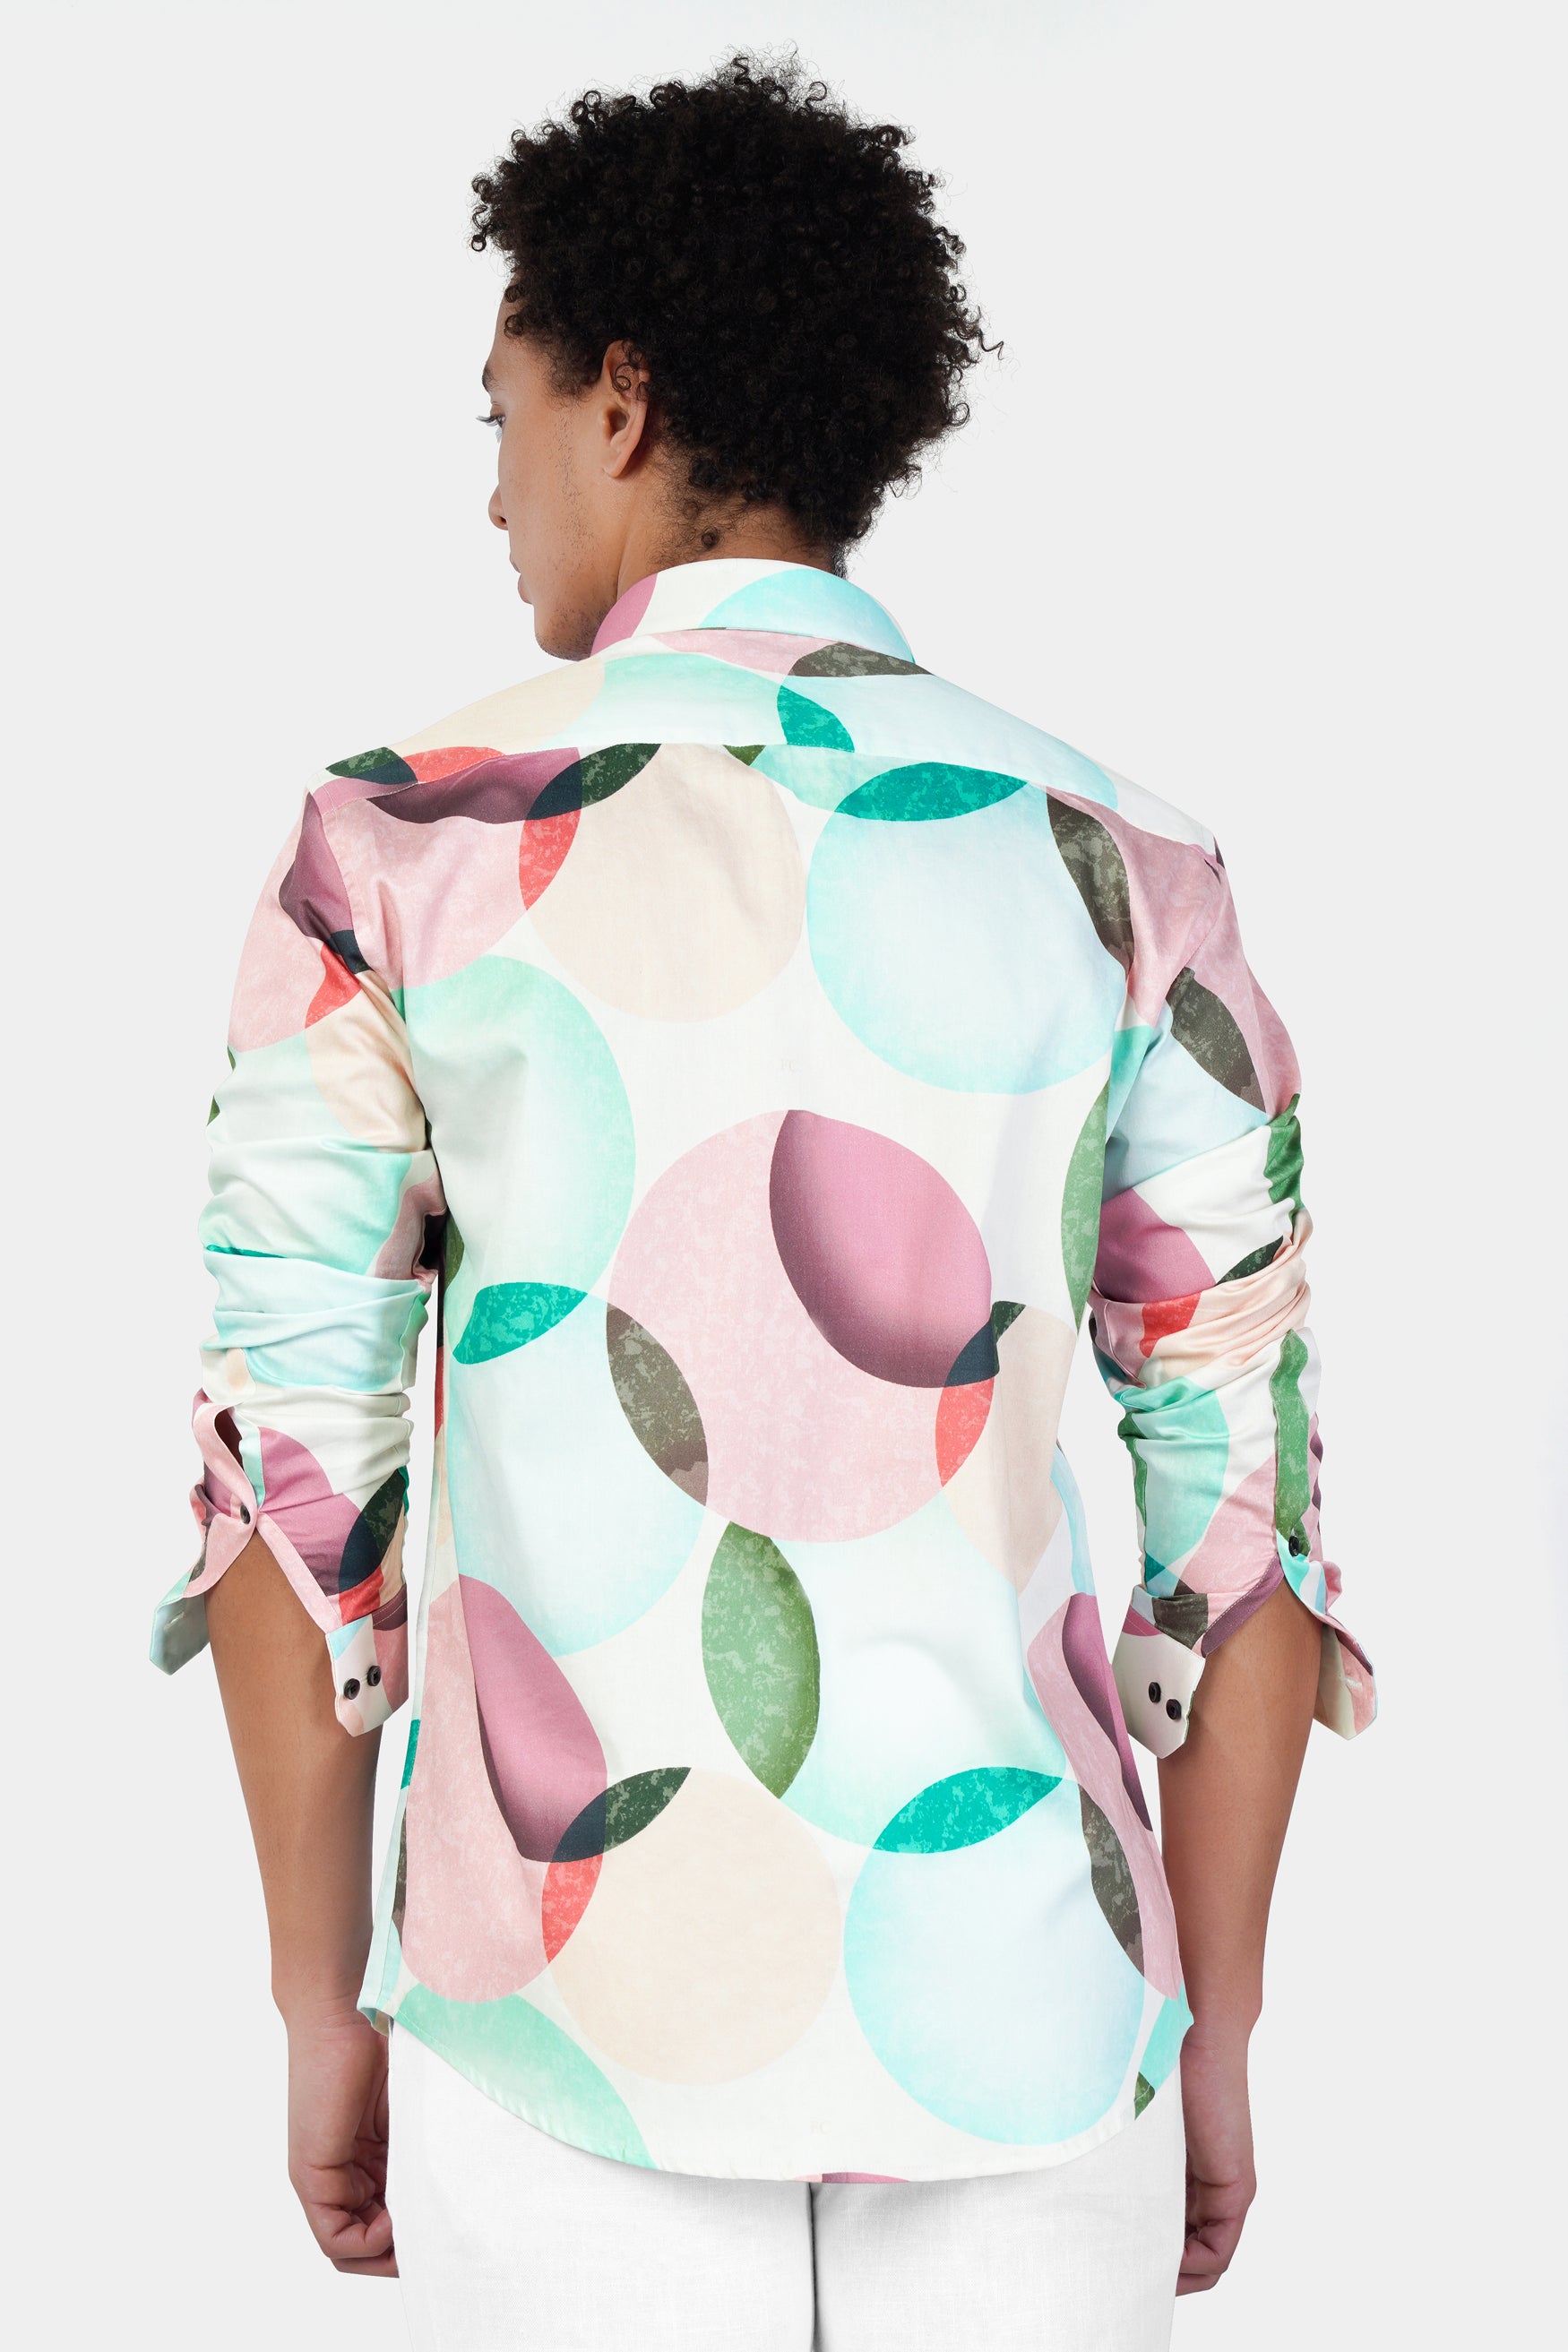 Bright White with Pastel Pink and Edgewater Green Abstract Printed Subtle Sheen Super Soft Premium Cotton Designer Shirt 12042-BLK-38, 12042-BLK-H-38, 12042-BLK-39, 12042-BLK-H-39, 12042-BLK-40, 12042-BLK-H-40, 12042-BLK-42, 12042-BLK-H-42, 12042-BLK-44, 12042-BLK-H-44, 12042-BLK-46, 12042-BLK-H-46, 12042-BLK-48, 12042-BLK-H-48, 12042-BLK-50, 12042-BLK-H-50, 12042-BLK-52, 12042-BLK-H-52